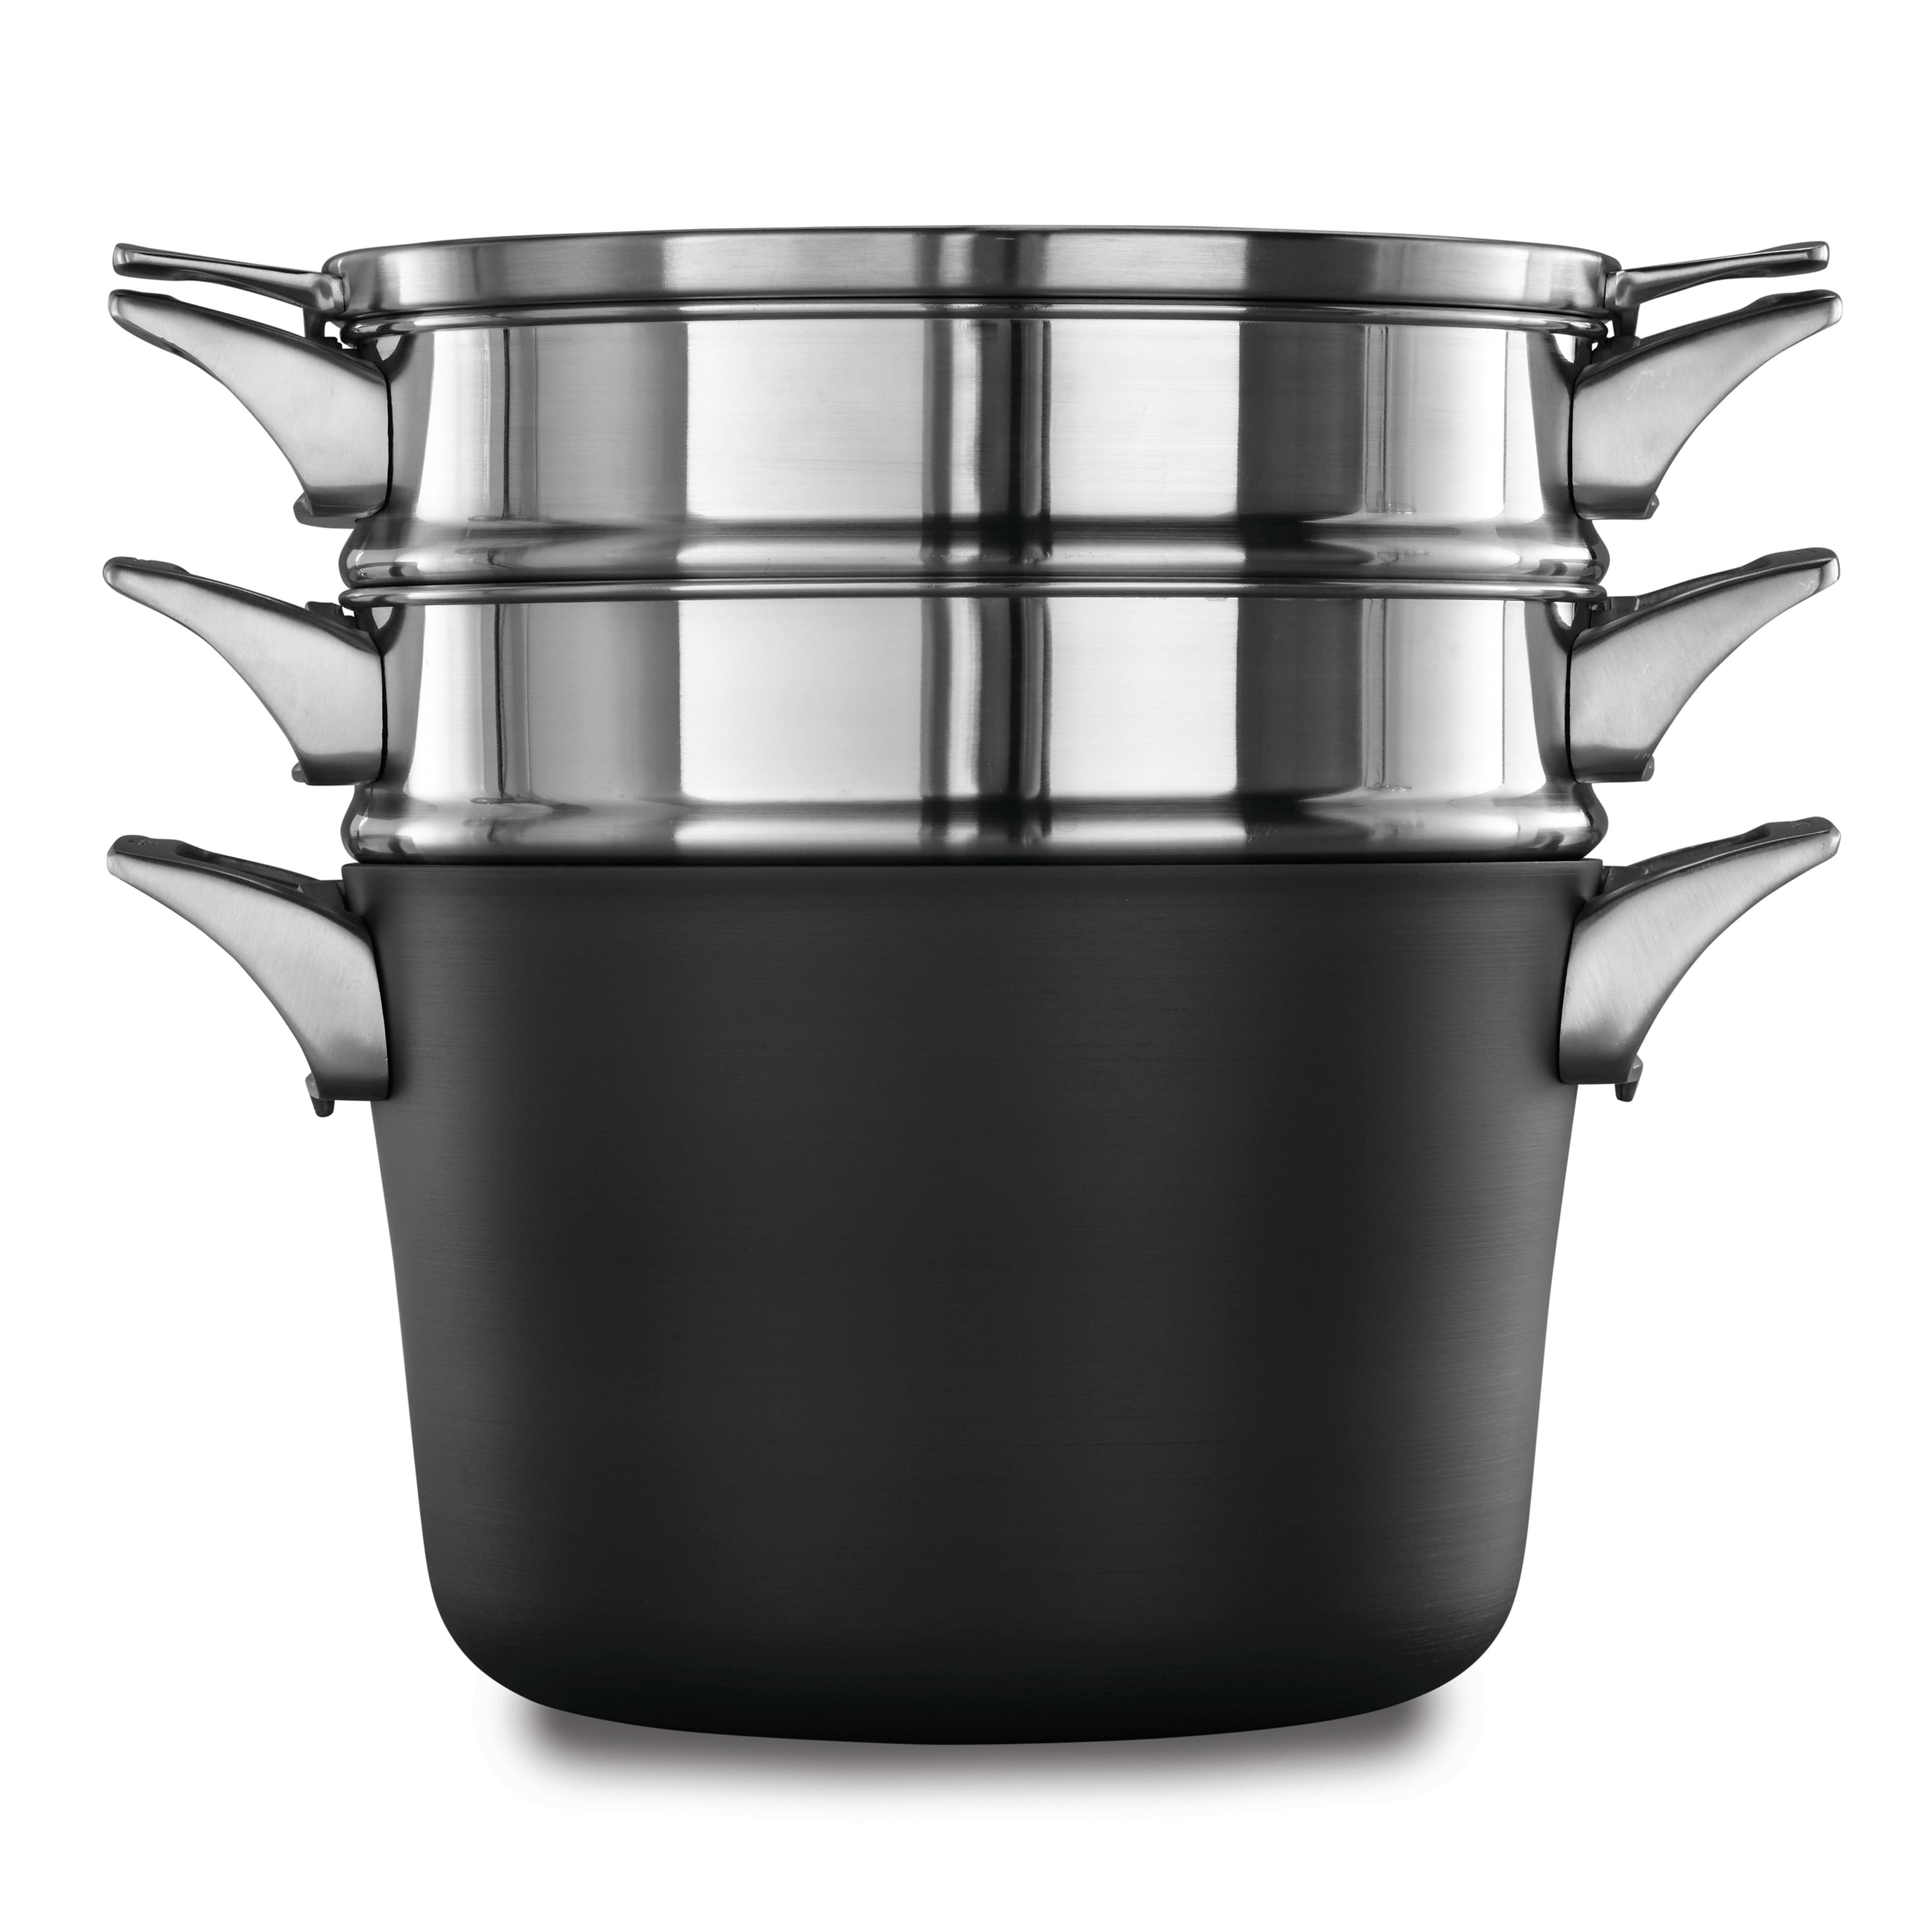 Calphalon Premier™ Space Saving Nonstick and Stainless Steel Cookware